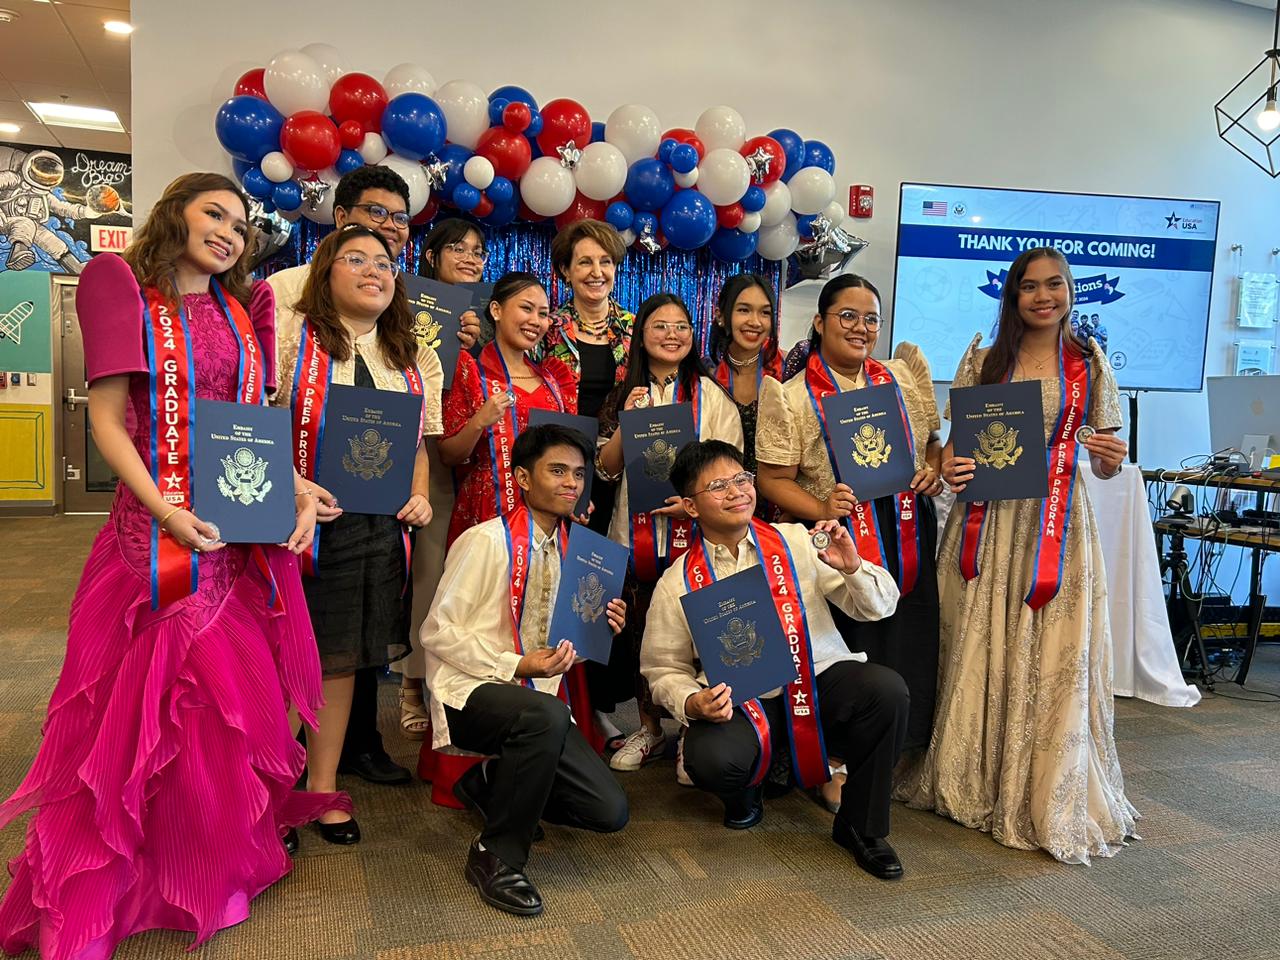 Five Filipino students have been accepted by premier universities and colleges in the United States (US), thanks to EducationUSA’s College Prep Program (CPP).